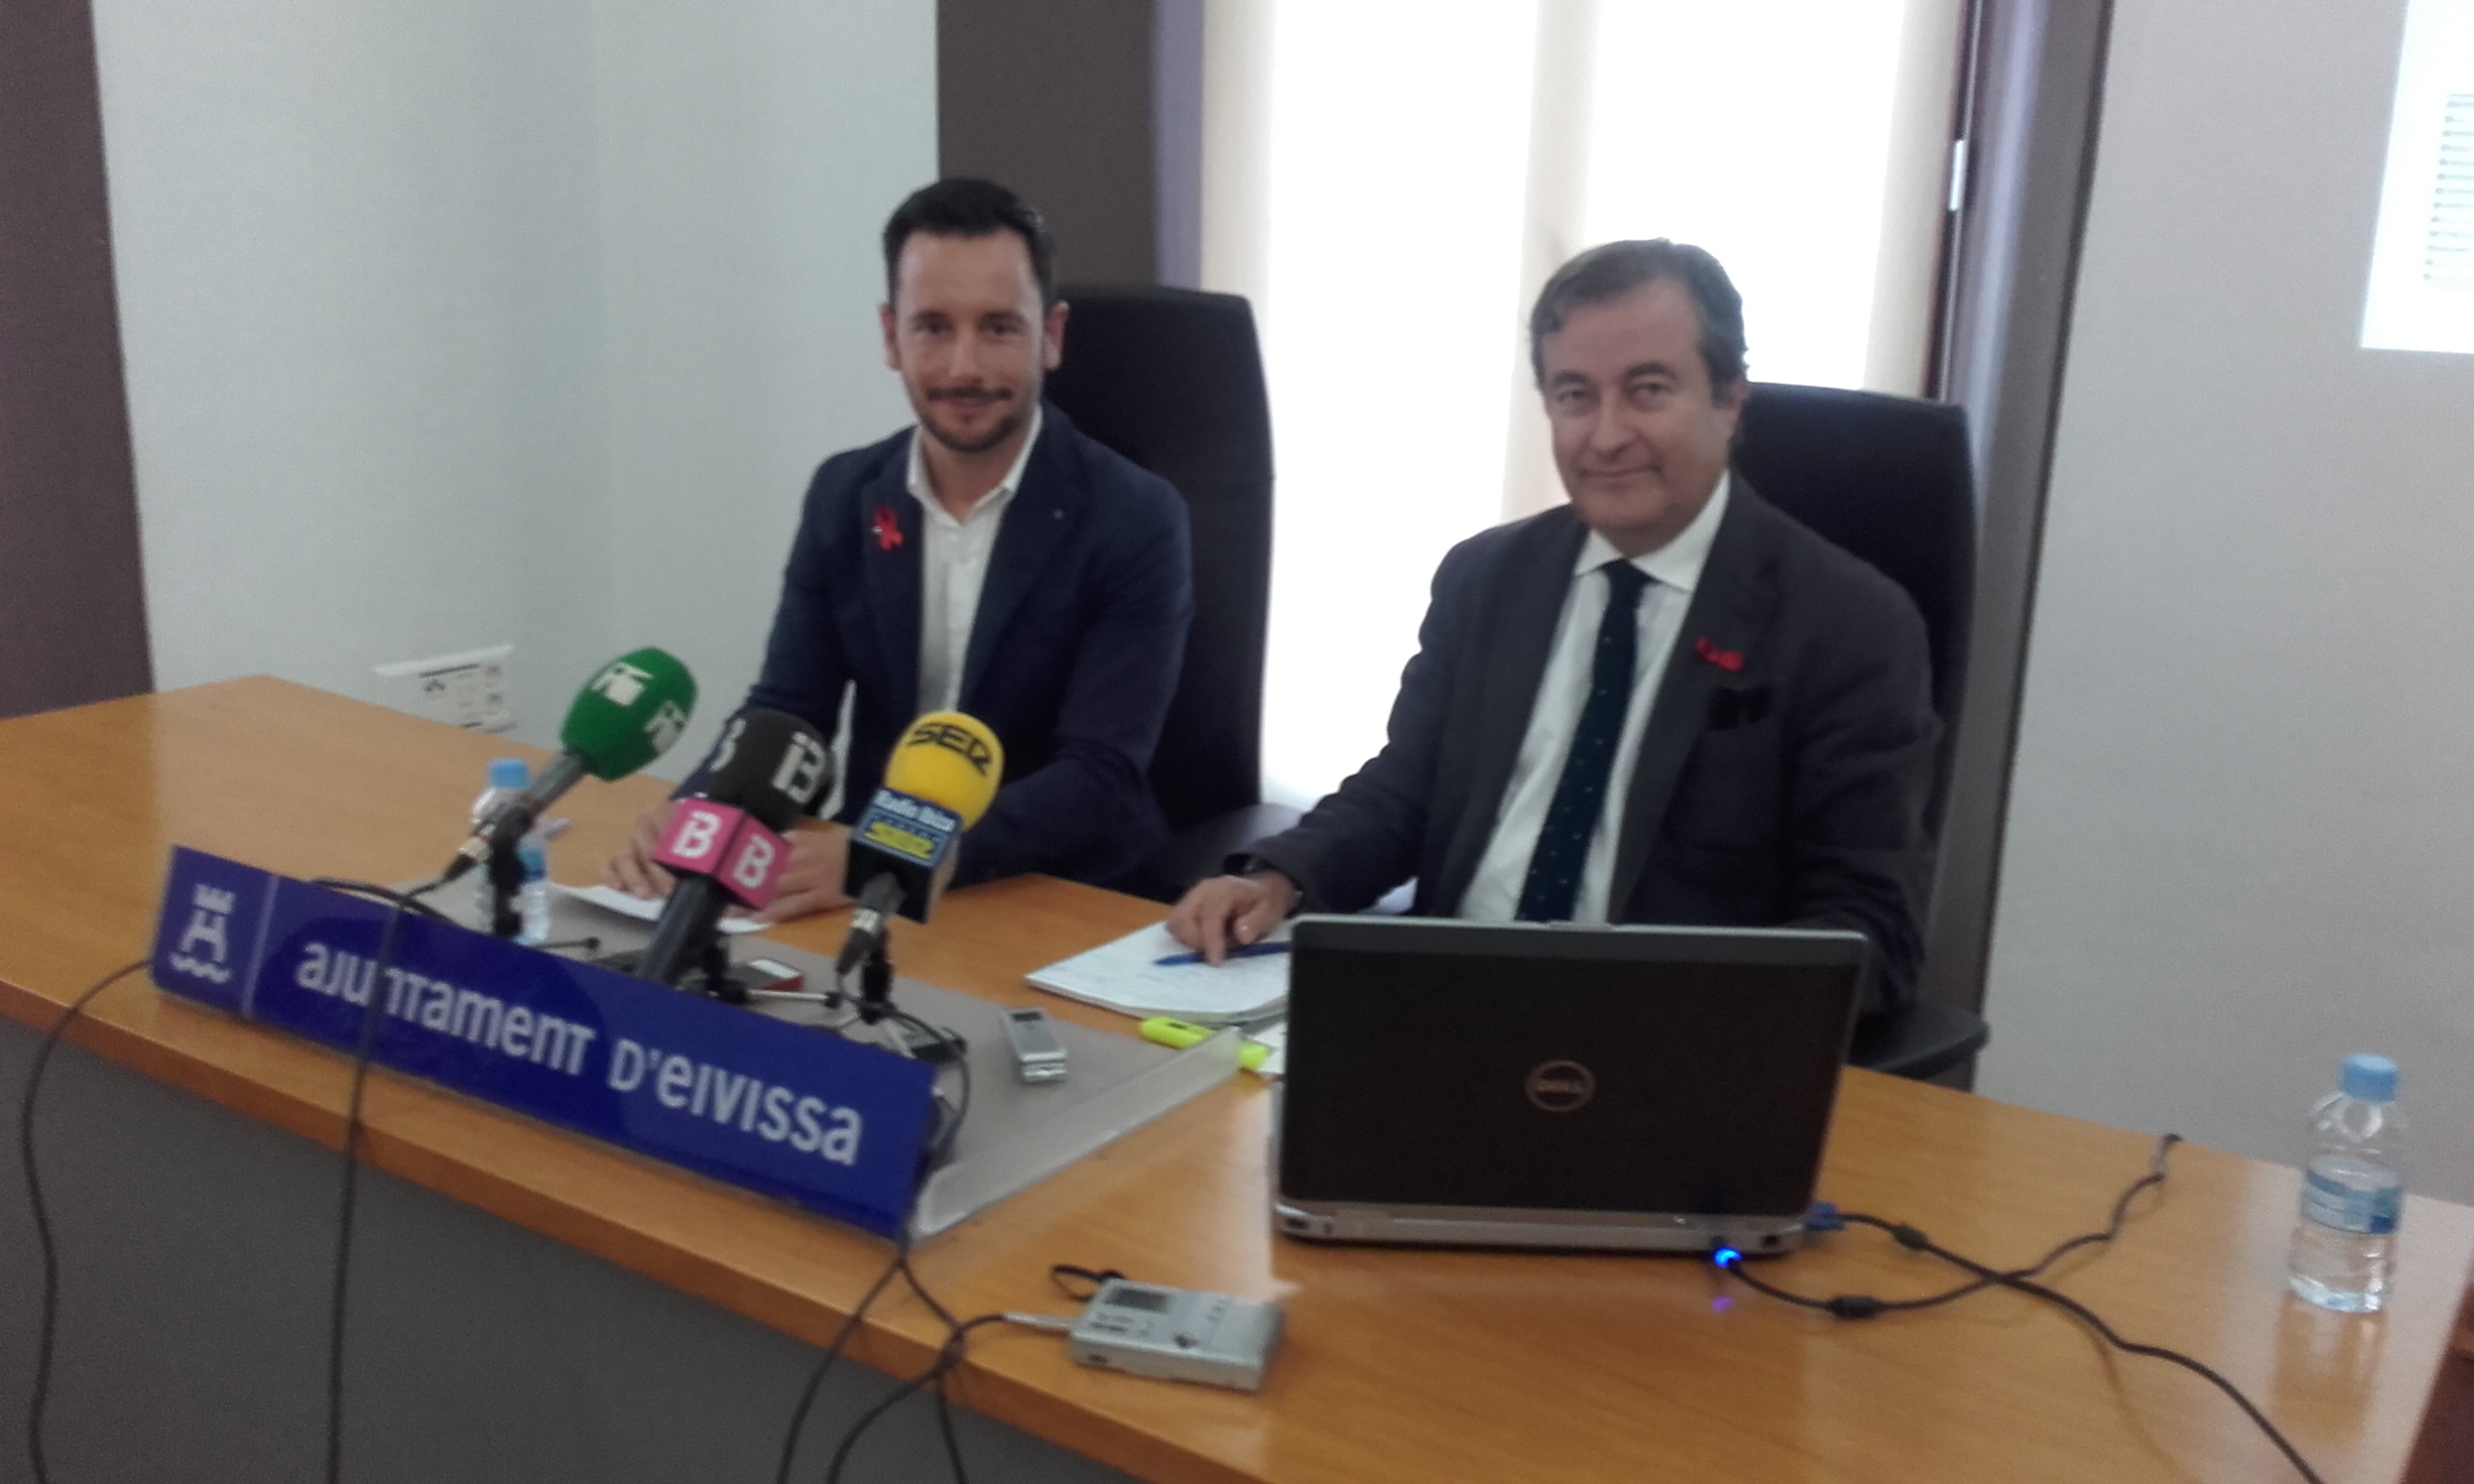 Agreement for the future port of Ibiza